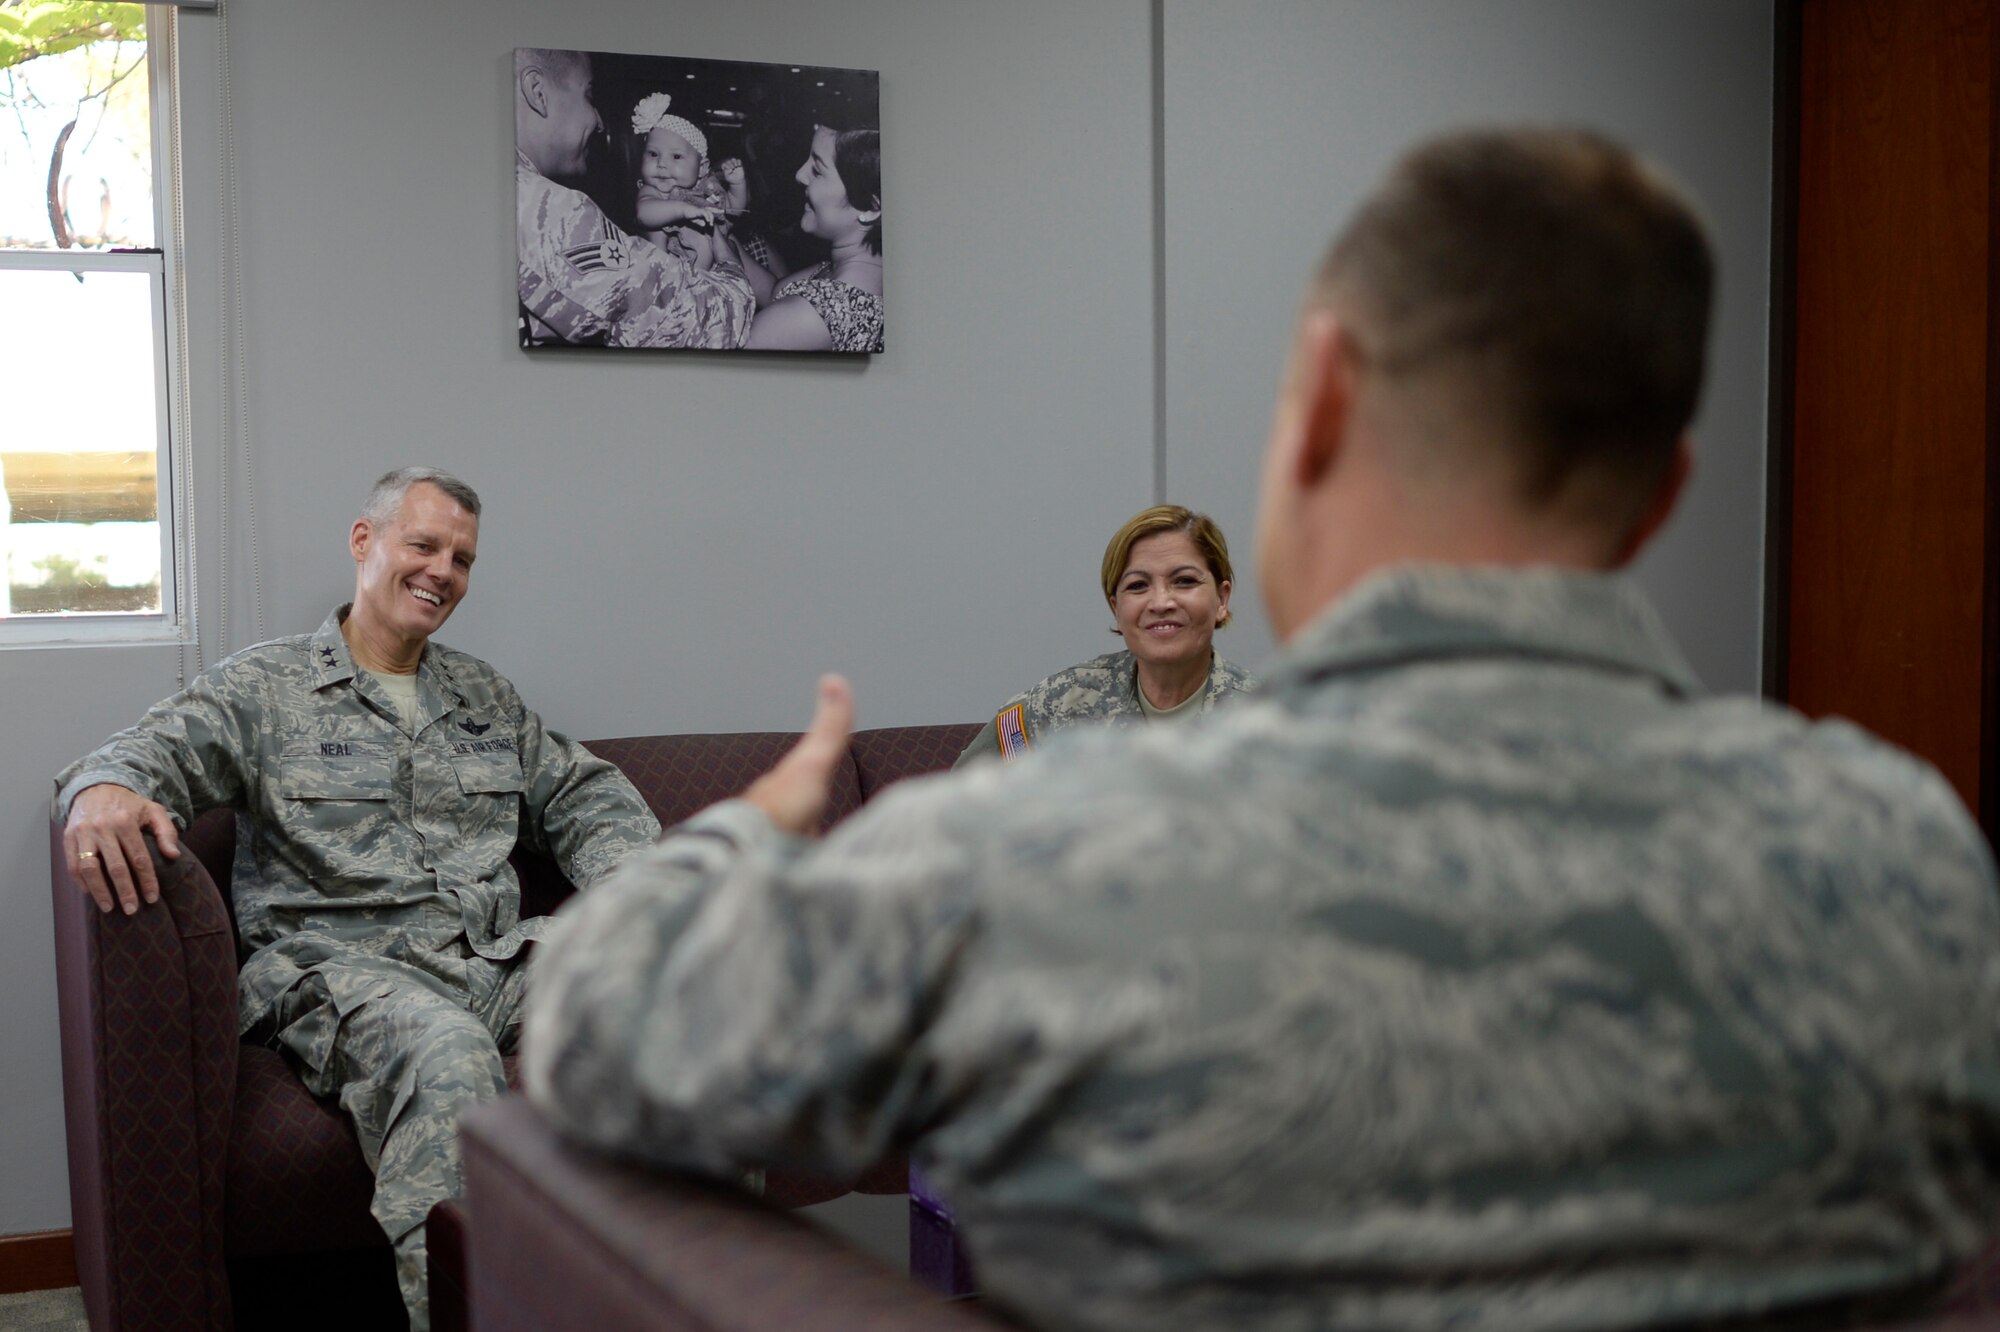 U.S. Air Force Acting Director, Air National Guard, Maj. Gen. Brian G. Neal, left, is welcomed by 156th Airlift Wing Commander, Lt. Col. Edward L. Vaughan, center, and the Adjutant General of the Puerto Rico National Guard, Maj. Gen. Marta Carcana during his April 9 visit to the 156th AW, Muñiz Air National Guard Base, Carolina, Puerto Rico. Neal attended briefings and toured facilities at the 156th AW and the 141st Air Control Squadron, Punta Borinquen Radar Site, Aguadilla, Puerto Rico. (U.S. Air  National Guard photo by Staff Sgt. Christian Jadot)